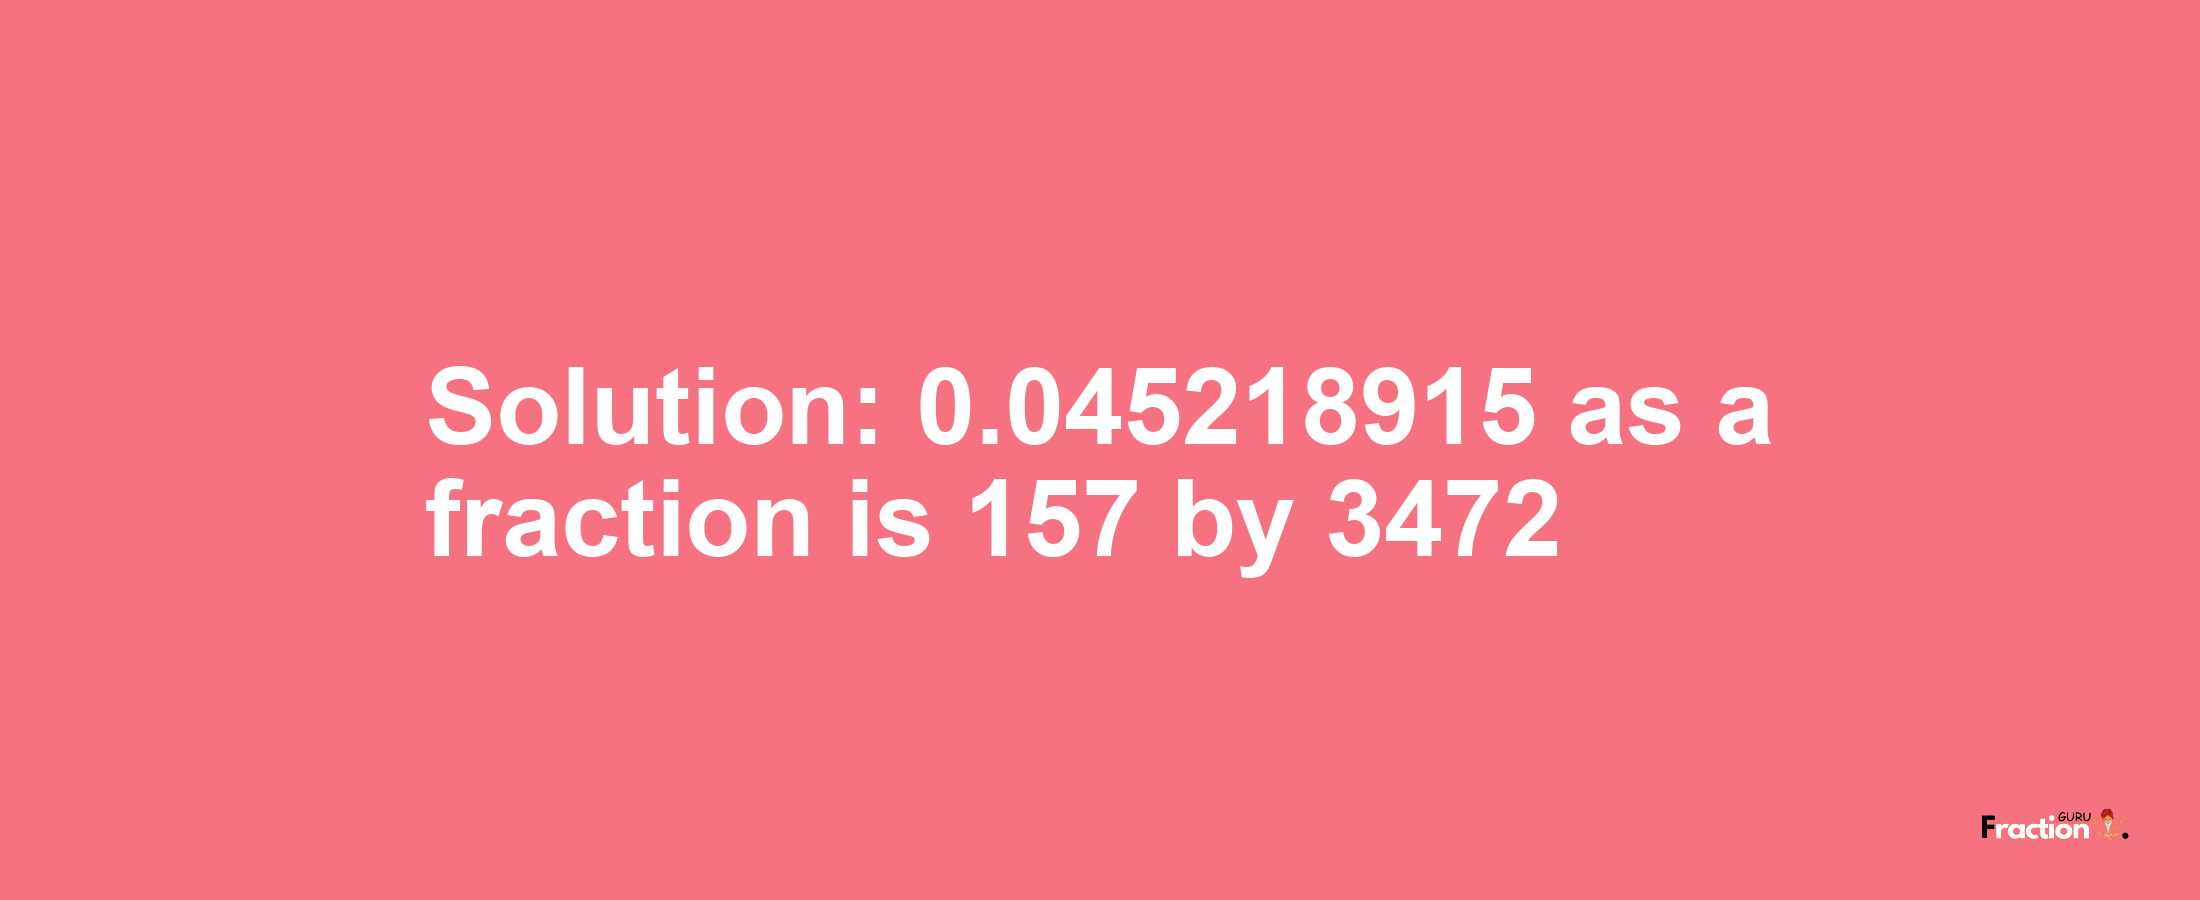 Solution:0.045218915 as a fraction is 157/3472